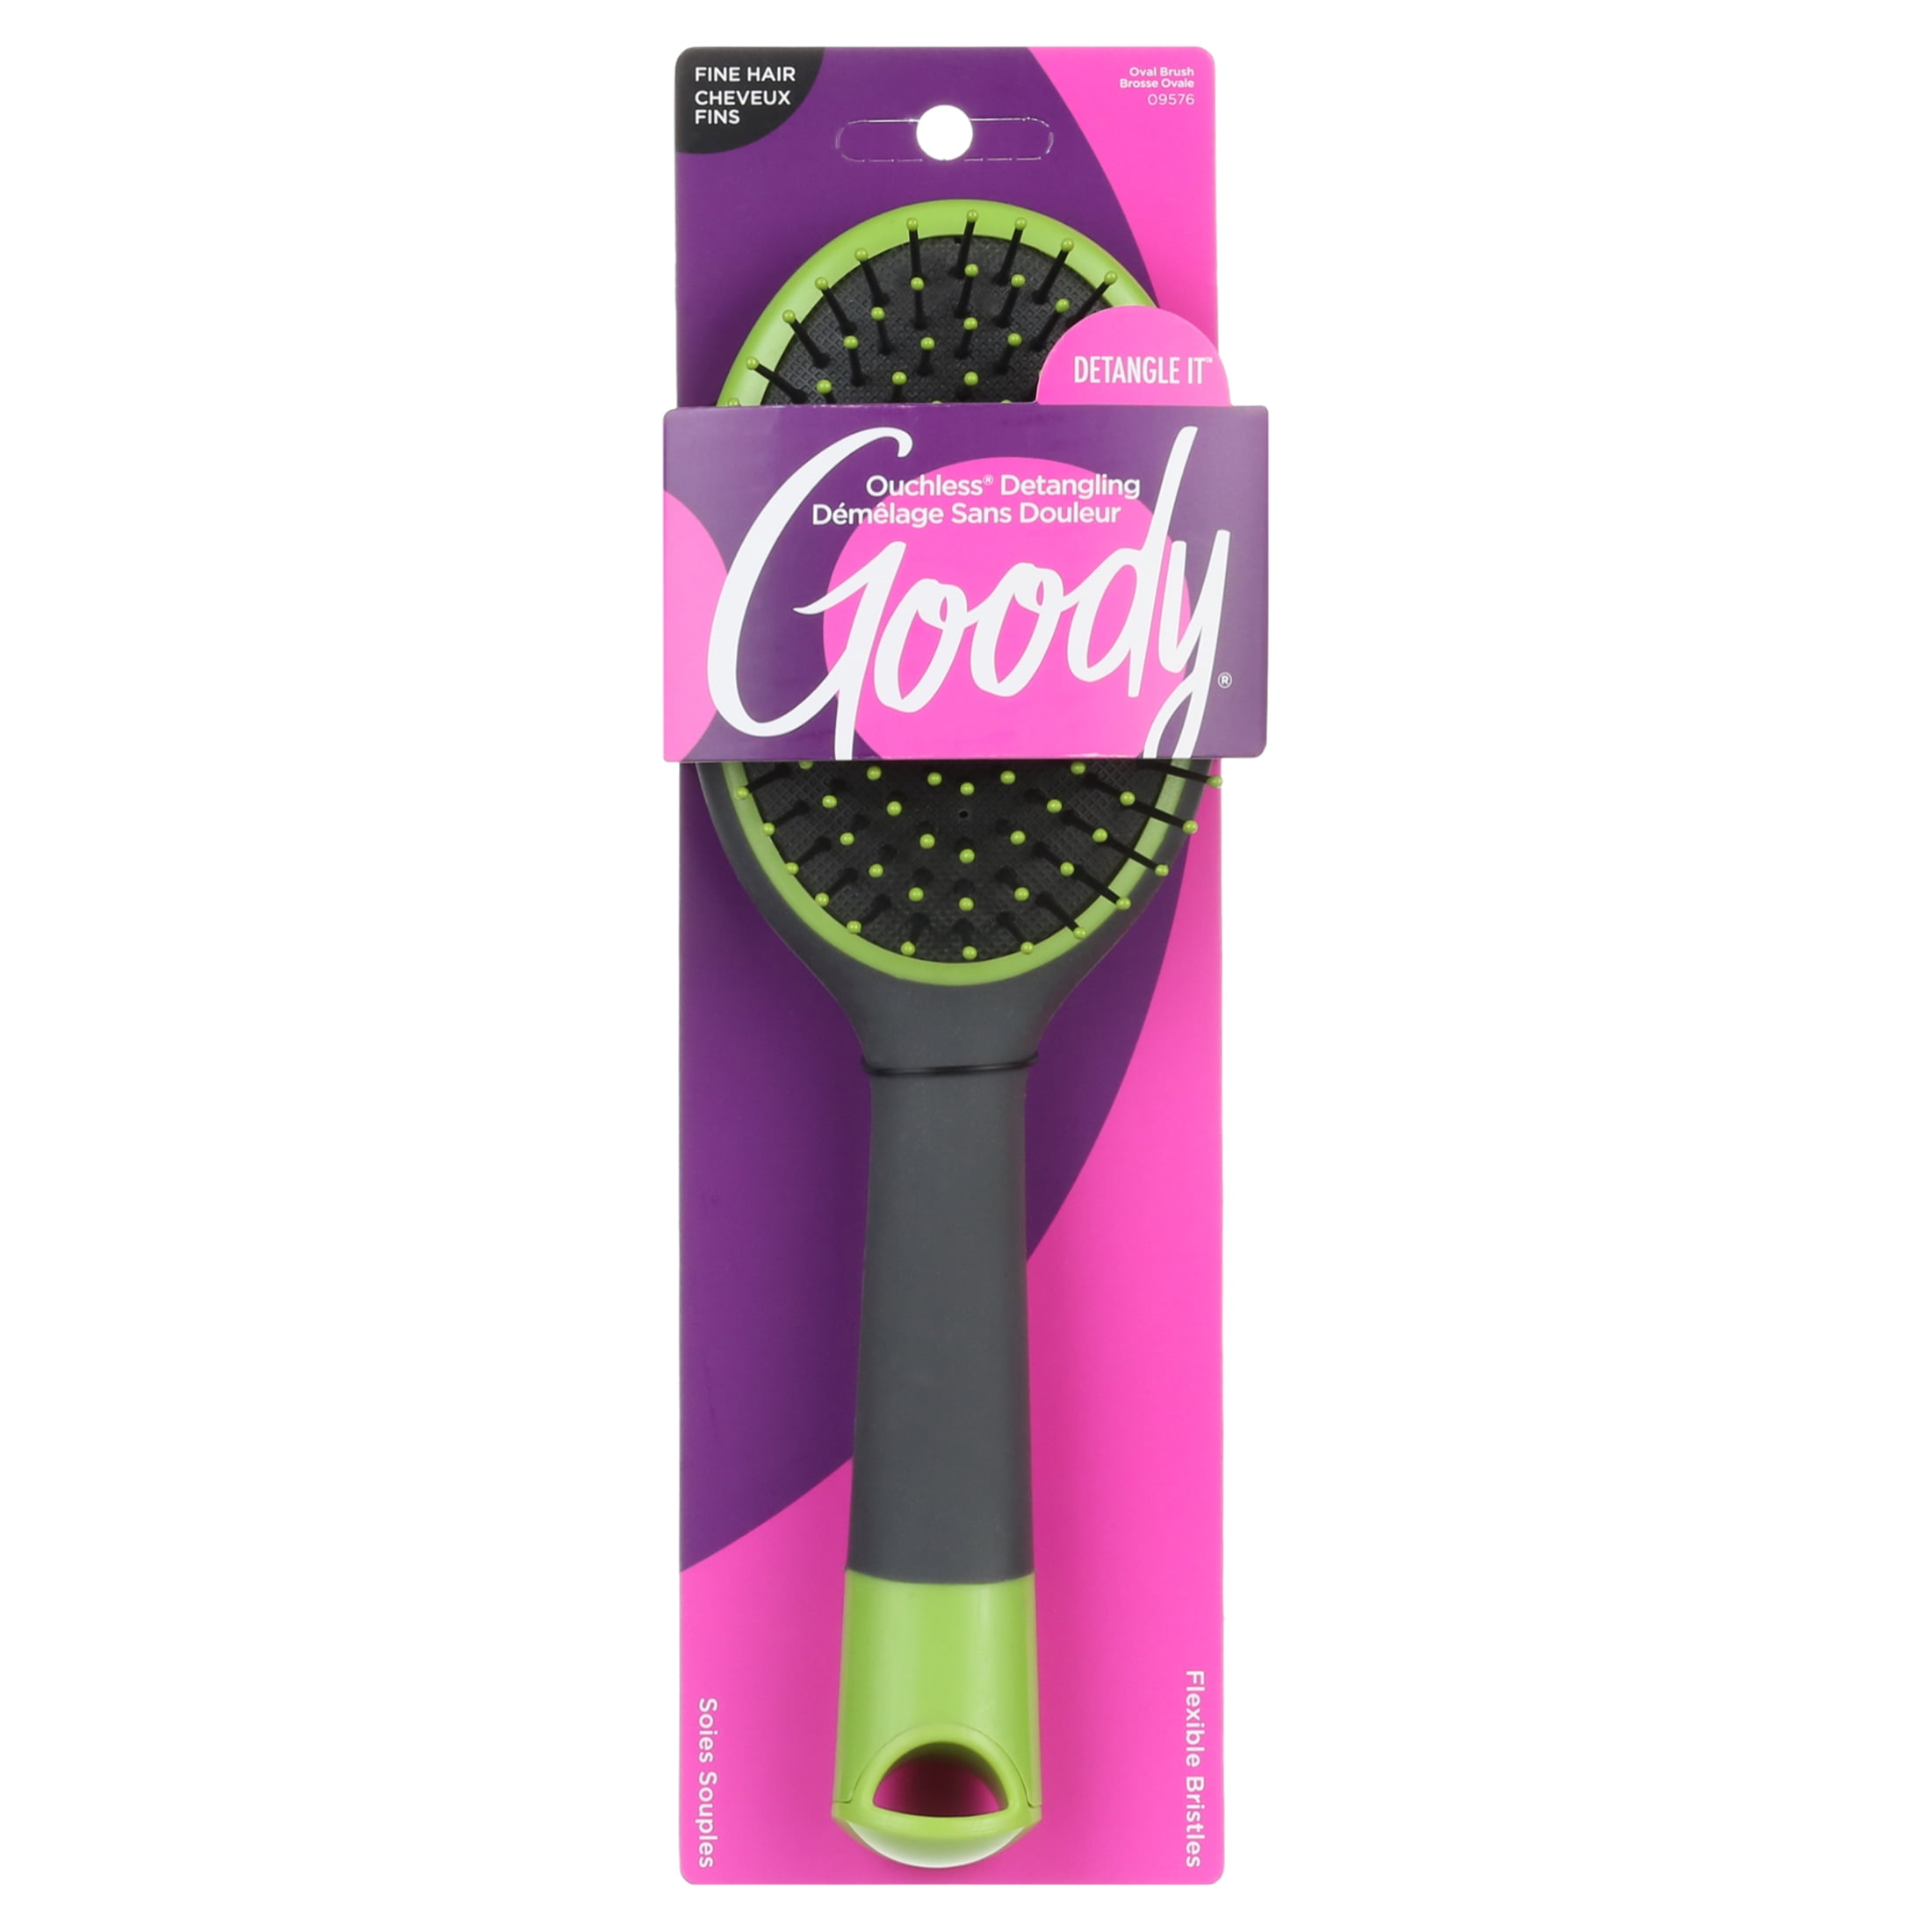  Goody Total Texture Edge Brush - Flexible Nylon Bristles for  Precise Styling - Wide and Fine Tooth Combs for a 3-in-1 Hair Accessories  for Women and Girls - Non-Slip Grip 